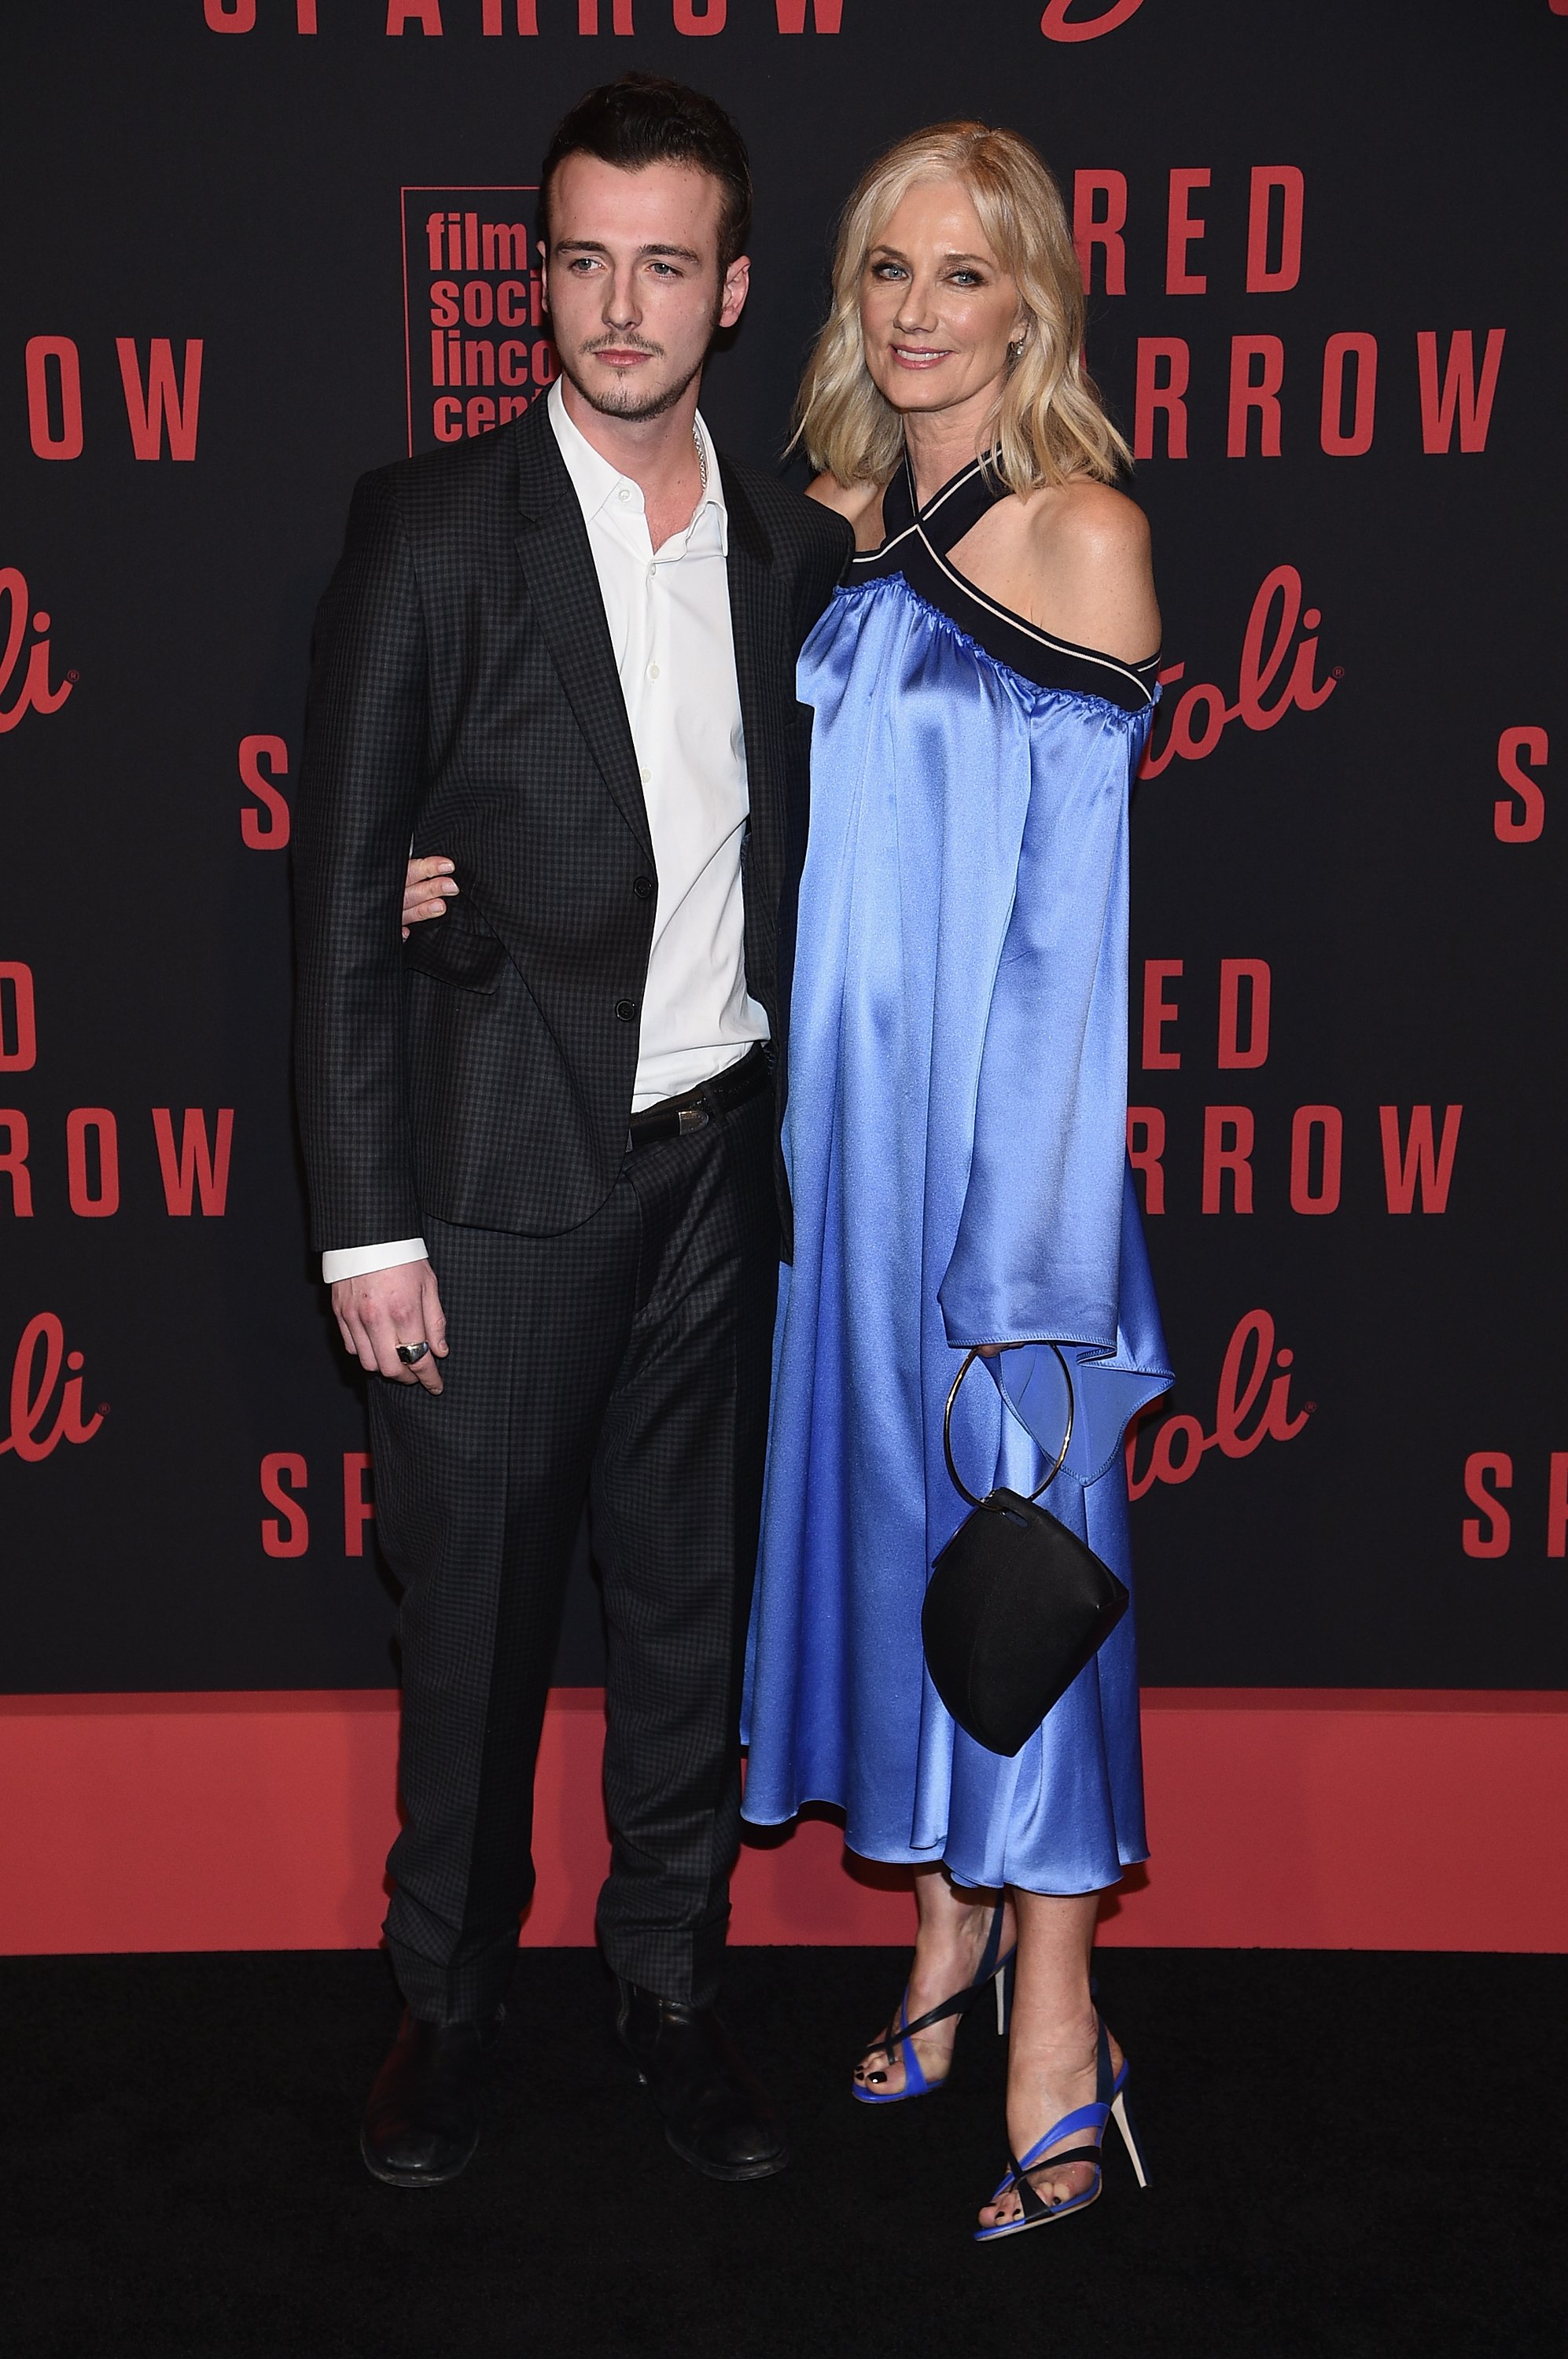 Micheál Neeson and Joely Richardson at the New York premiere of "Red Sparrow" on February 26, 2018 | Source: Getty Images